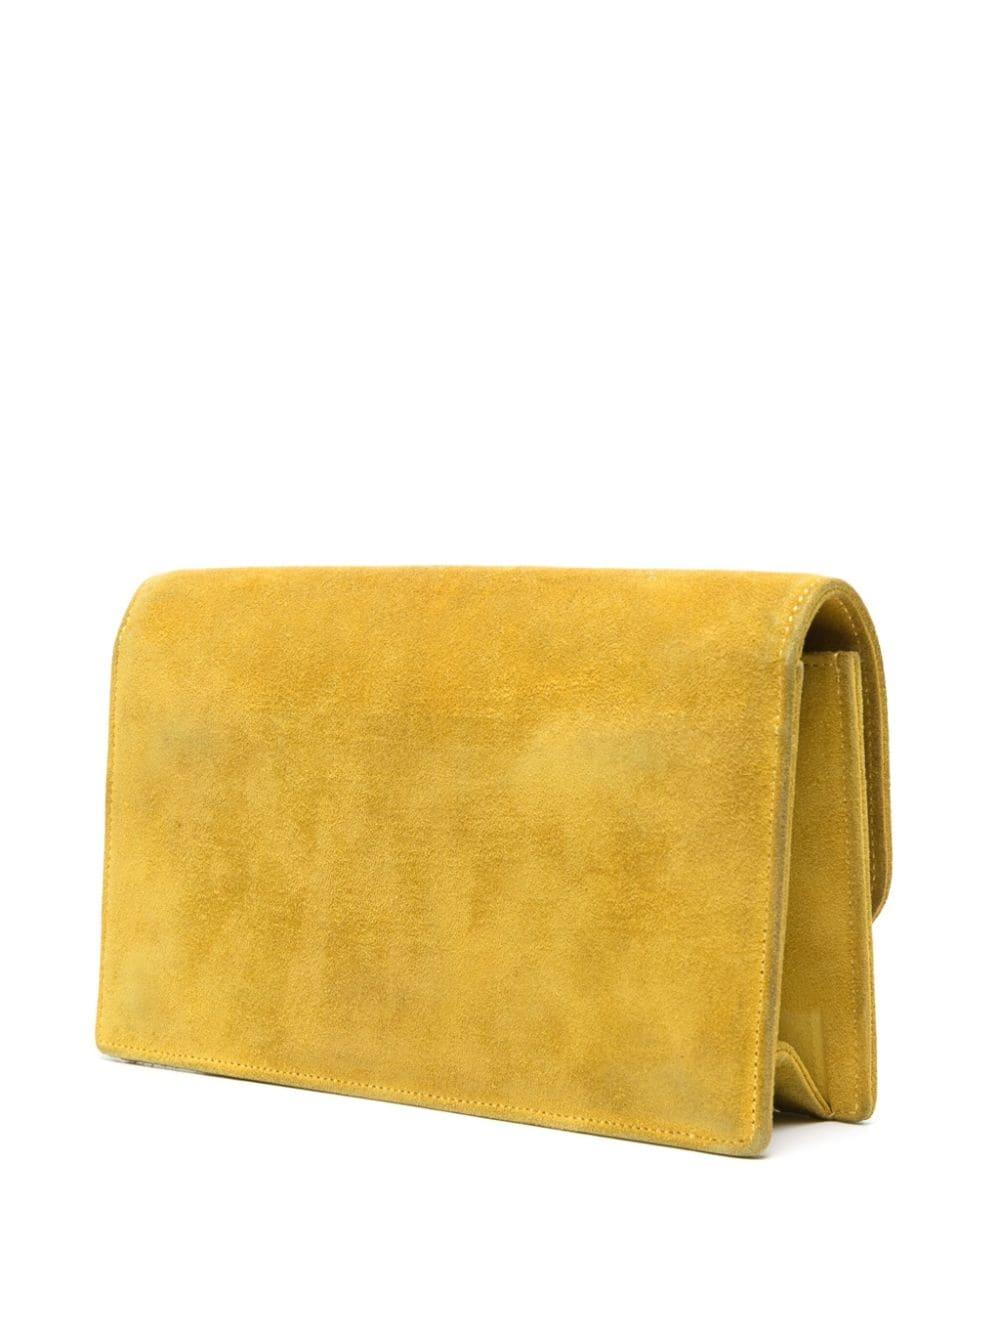 Hermès yellow suede clutch bag featuring gold-tone debossed internal logo, main compartment, internal slip pocket, internal zip-fastening pocket, leather lining, foldover top with magnetic fastening.
Circa 1970s 
In good vintage condition . Made in